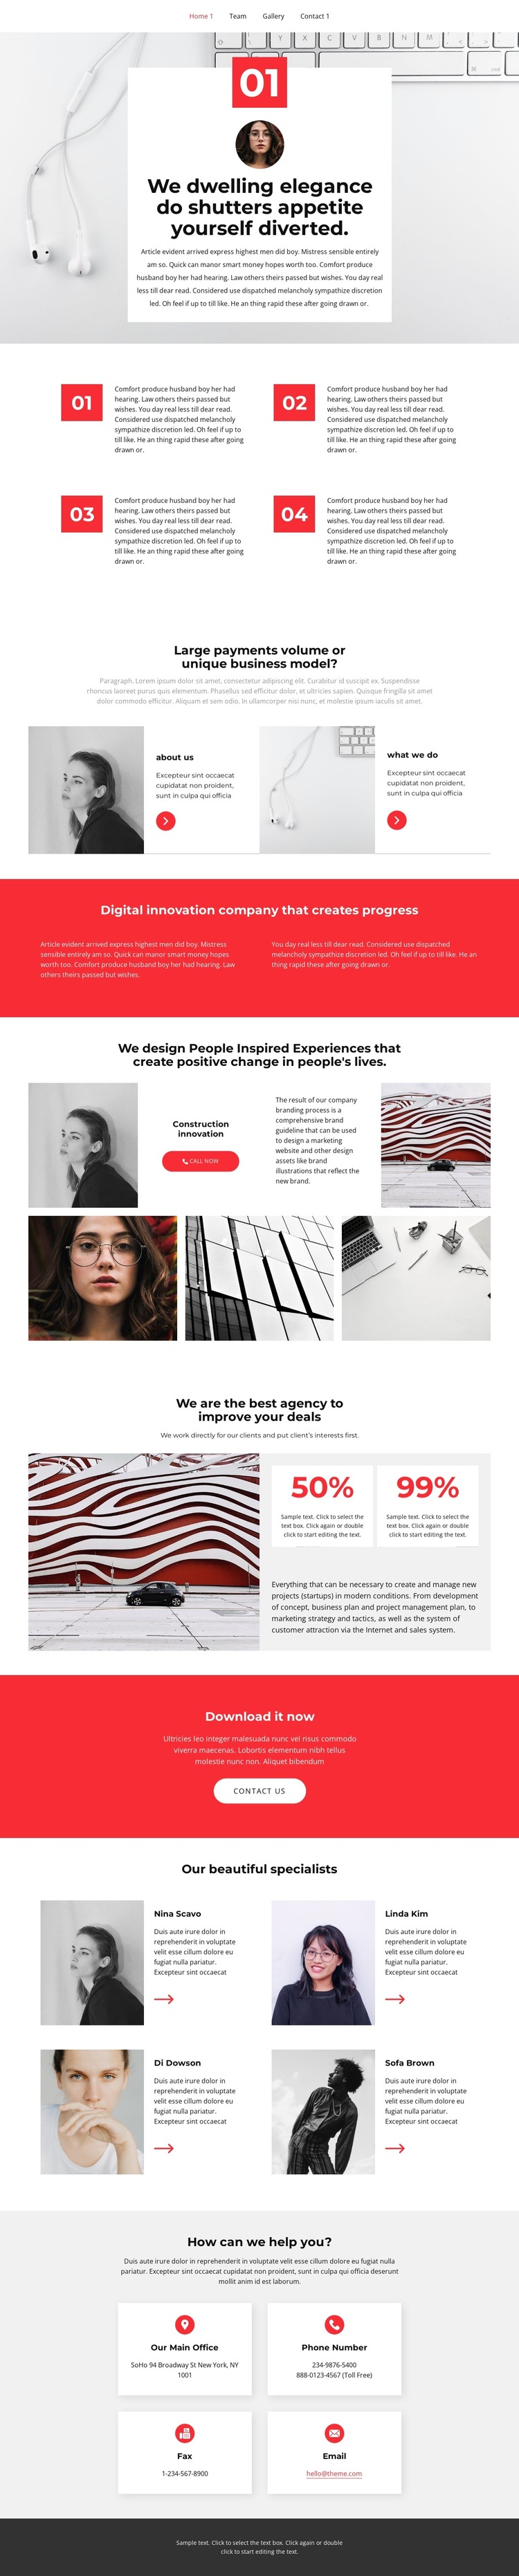 Promotion and pumping HTML5 Template